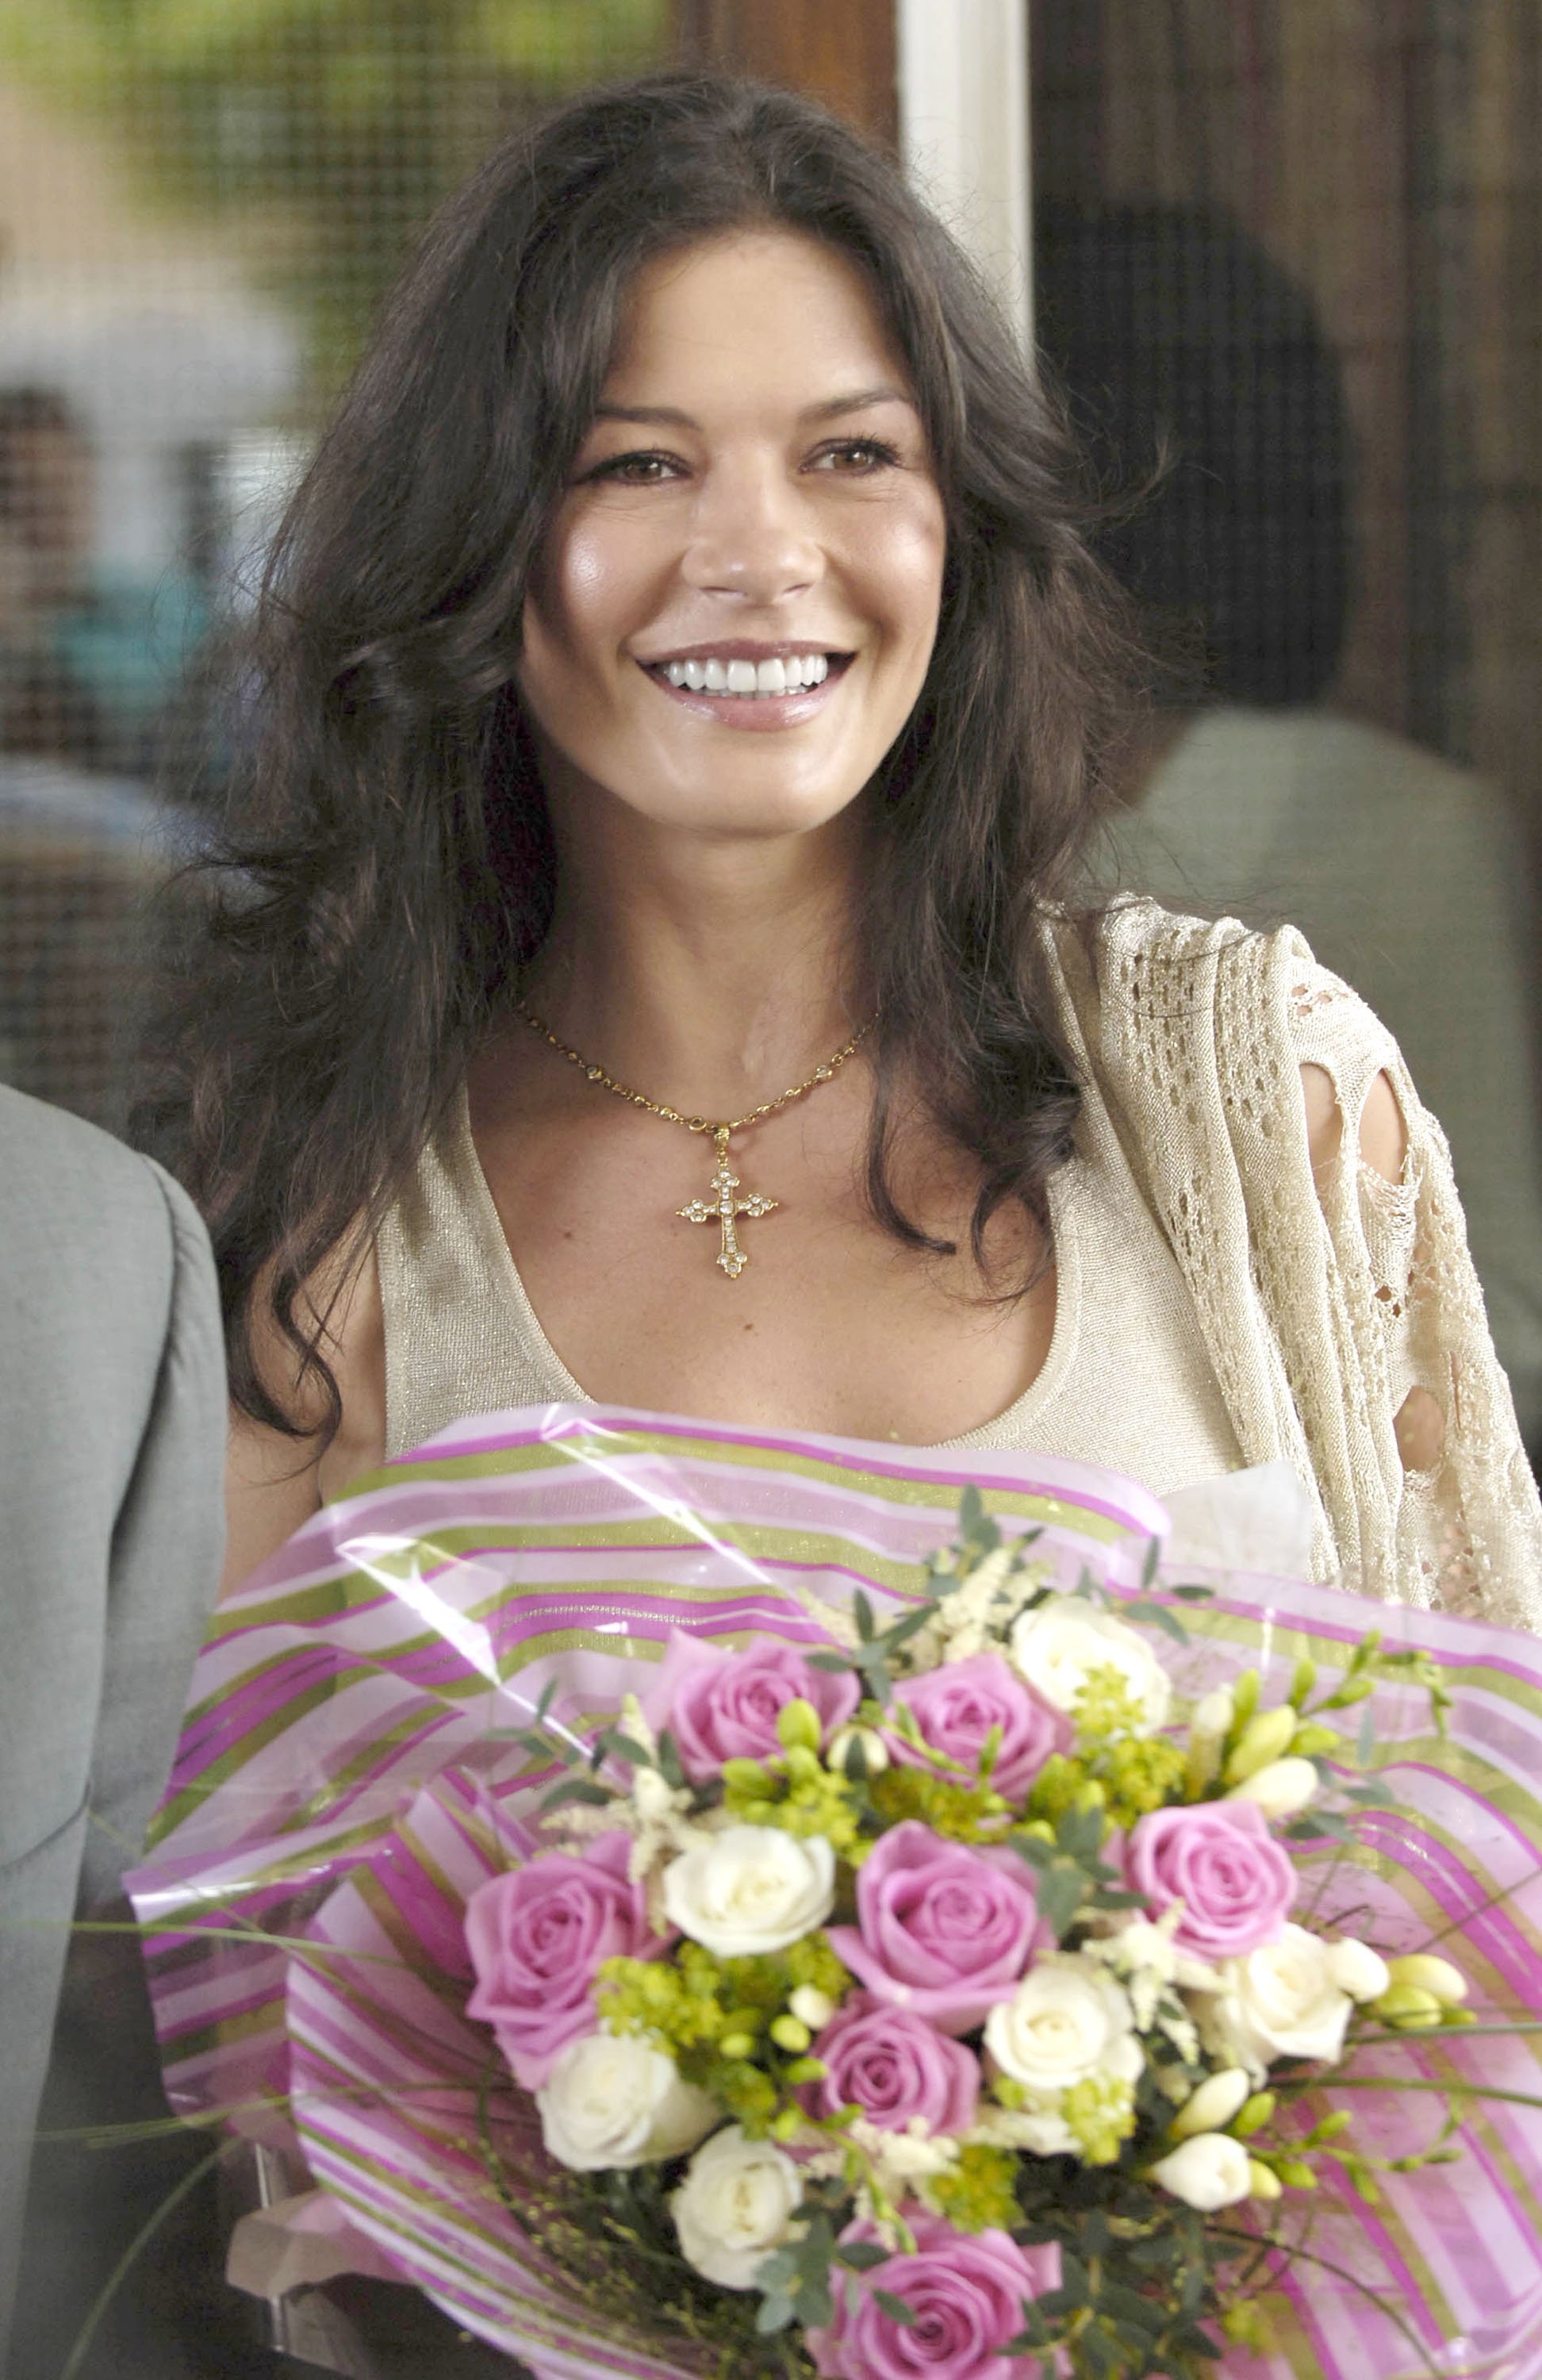 Catherine Zeta Jones was pictured smiling at a children's hospital in Wales. | Source: Getty Images